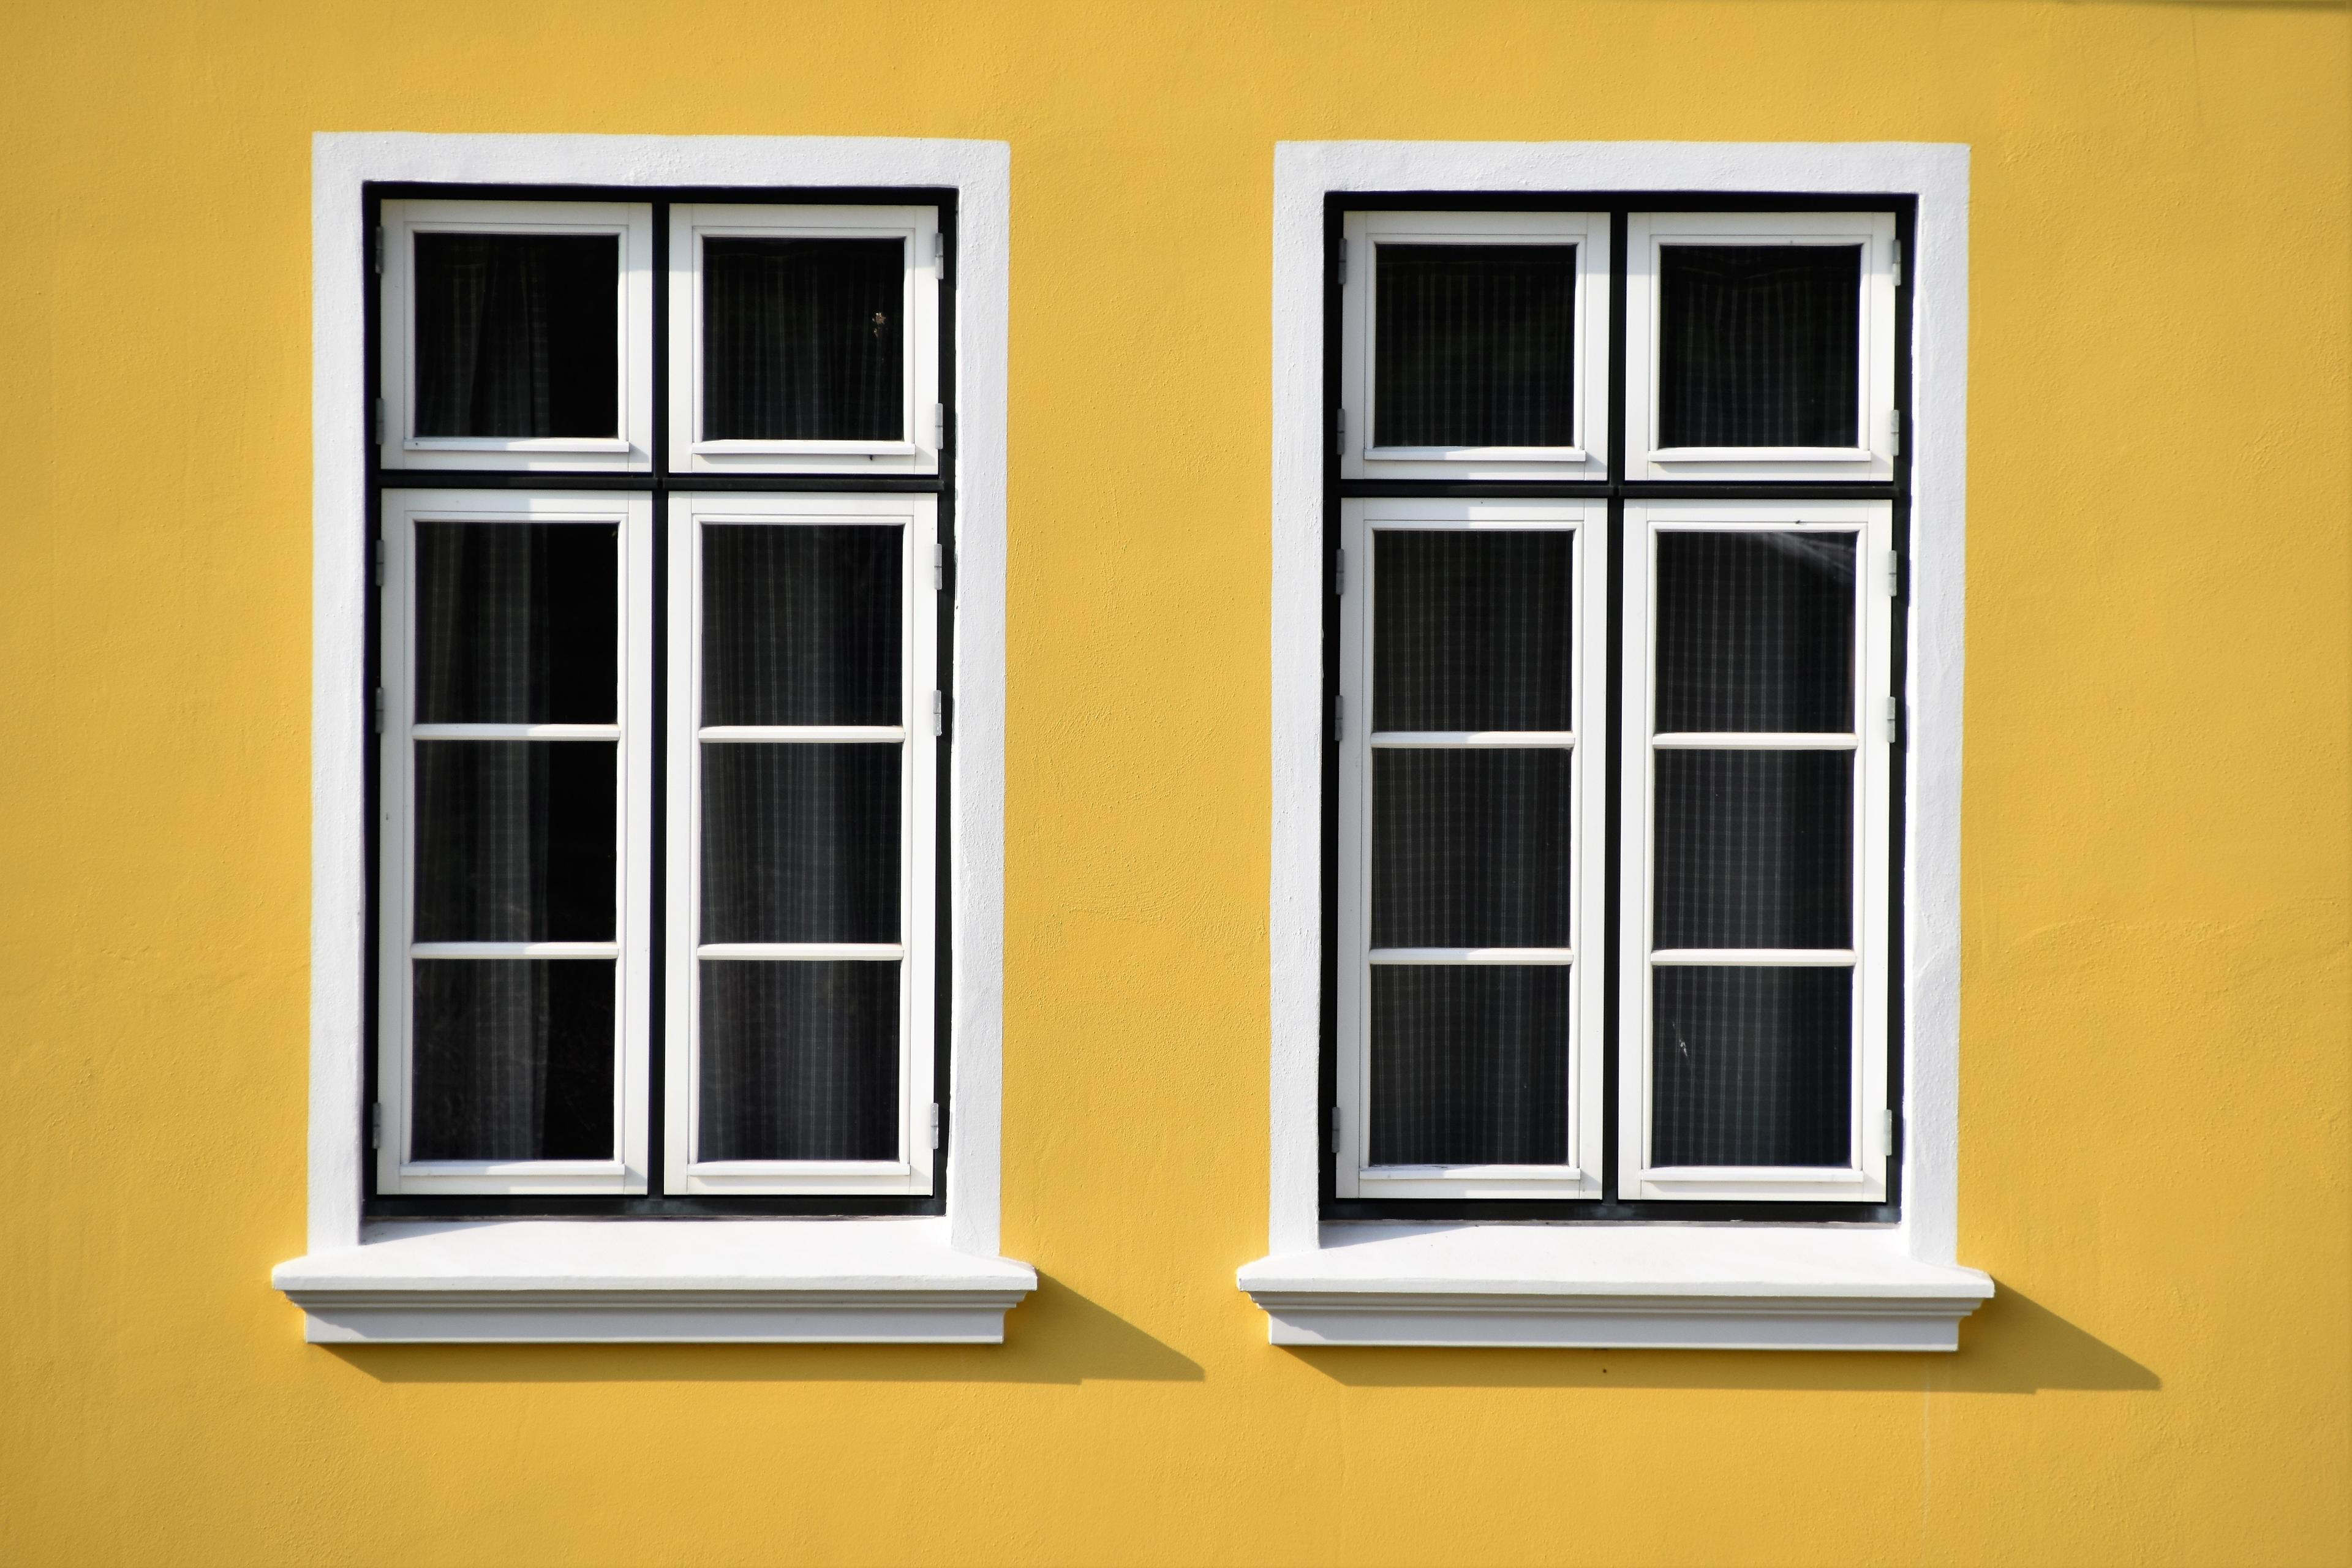 Two black windows with white trim against a yellow wall